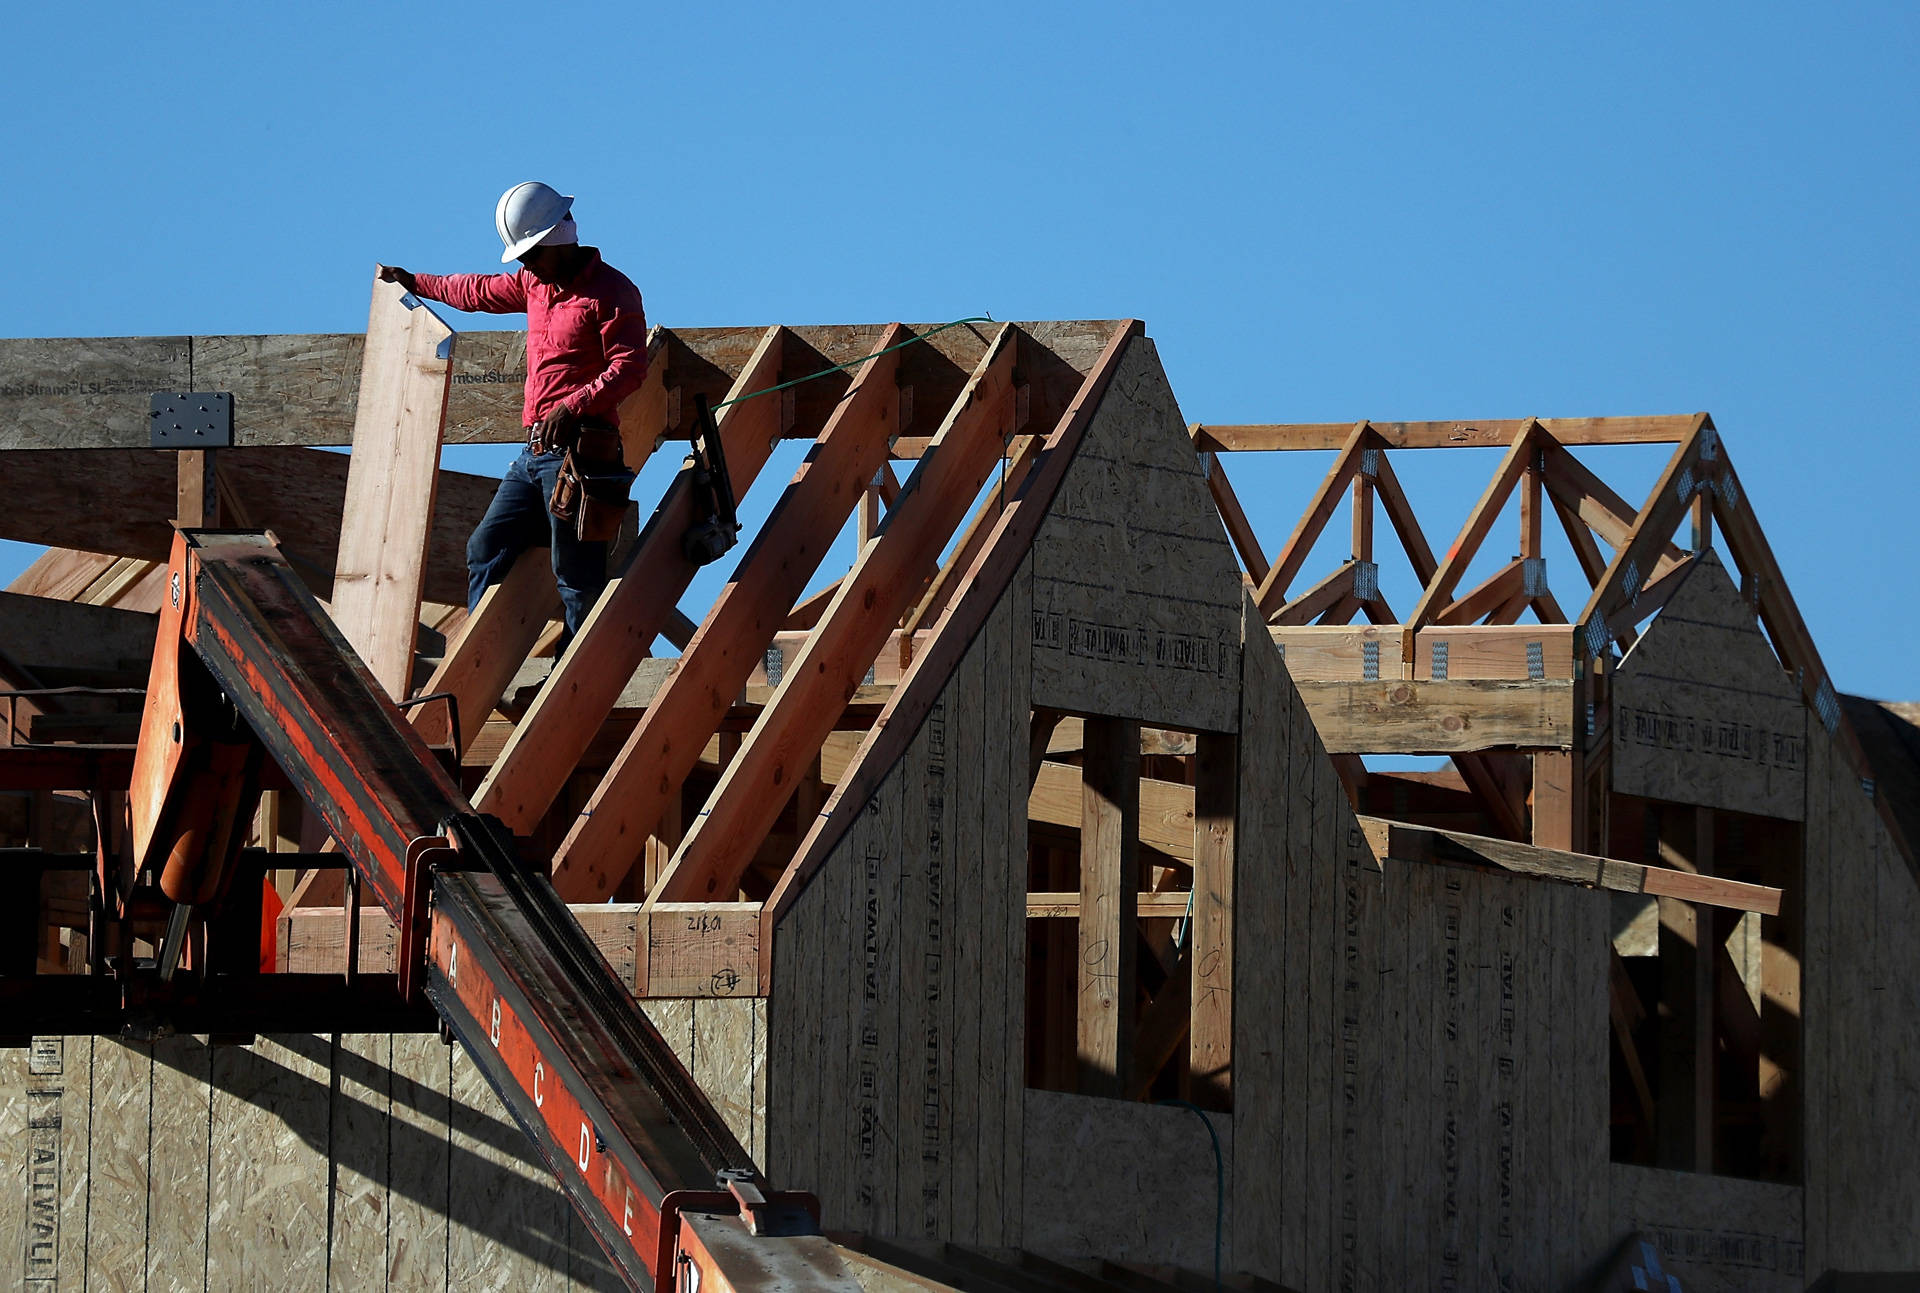 The bond measure addresses one cause of California’s affordable housing crisis: a lack of state funding to construct homes for low-income residents. Justin Sullivan/Getty Images